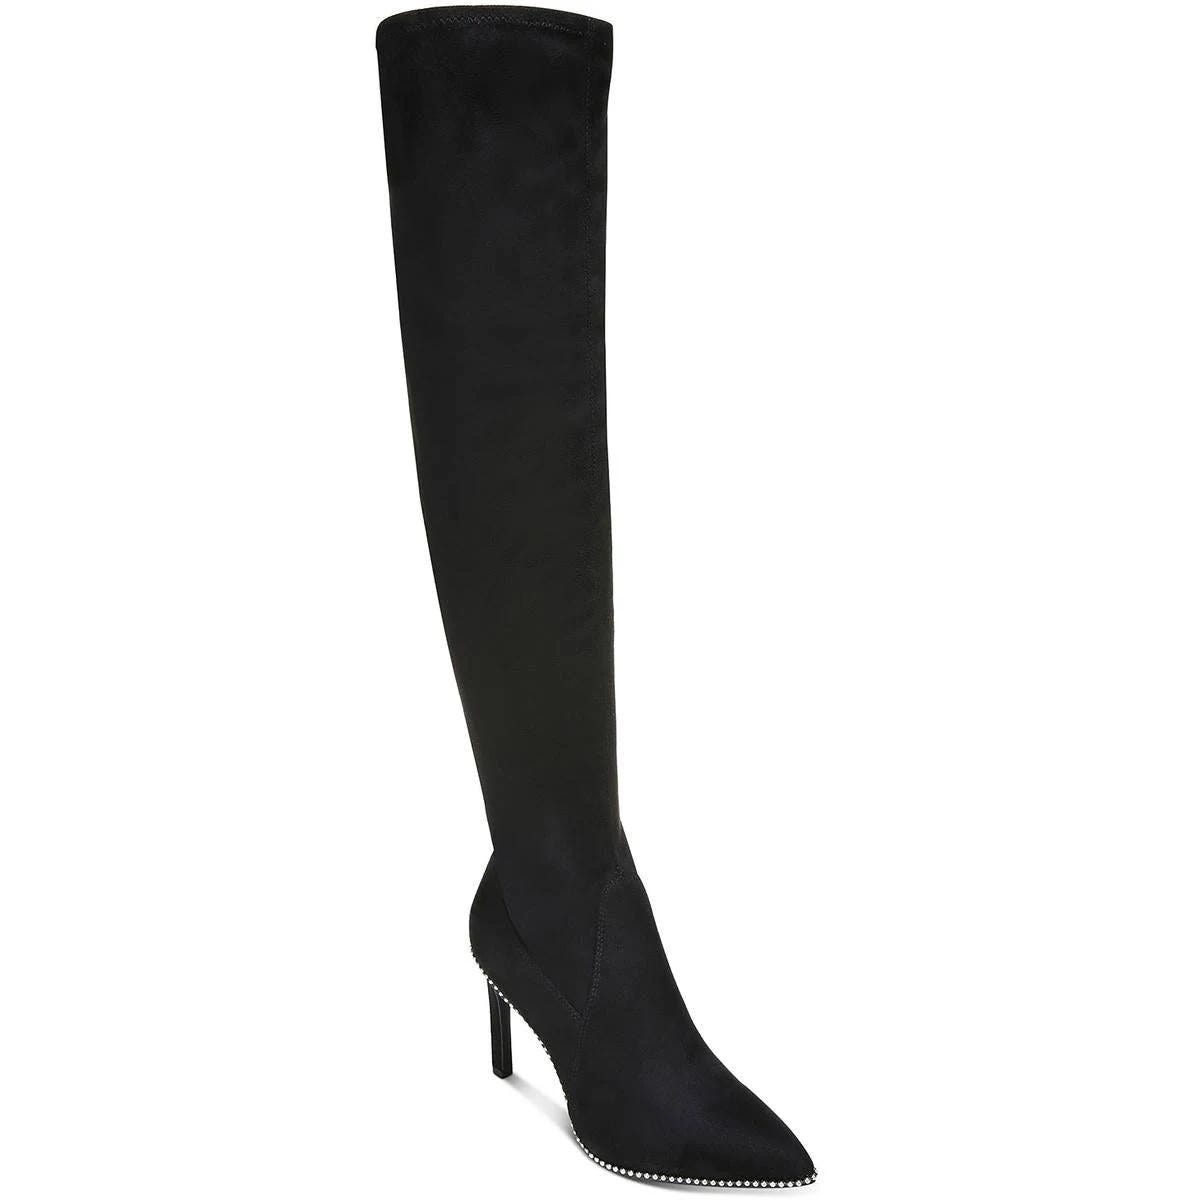 Bar III Milliee Faux Suede Tall Boots for Women | Image